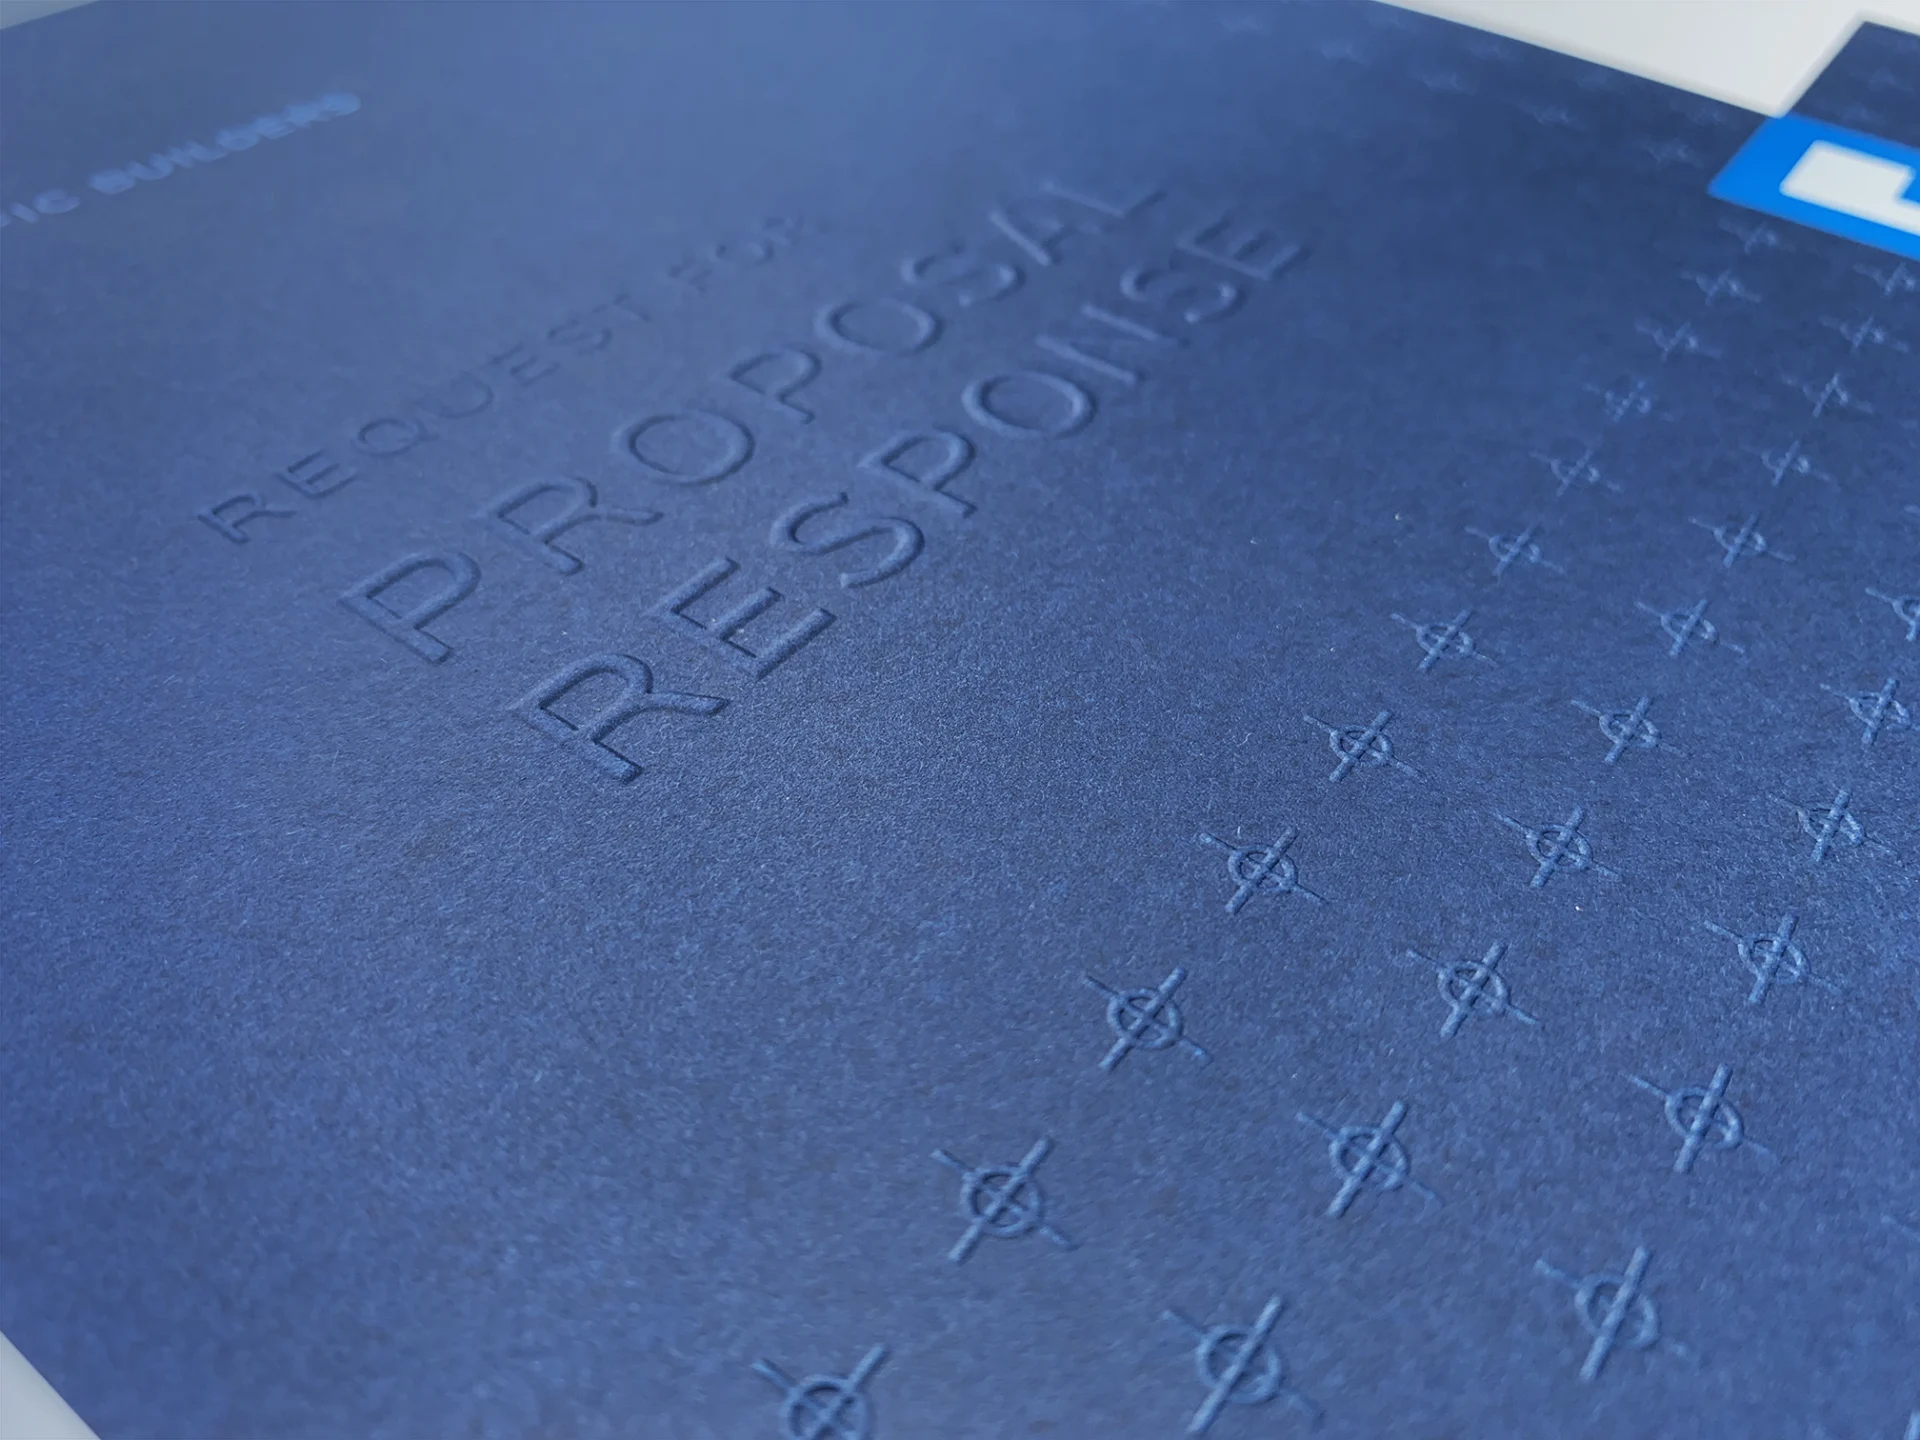 A close up of a blue book with writing on it